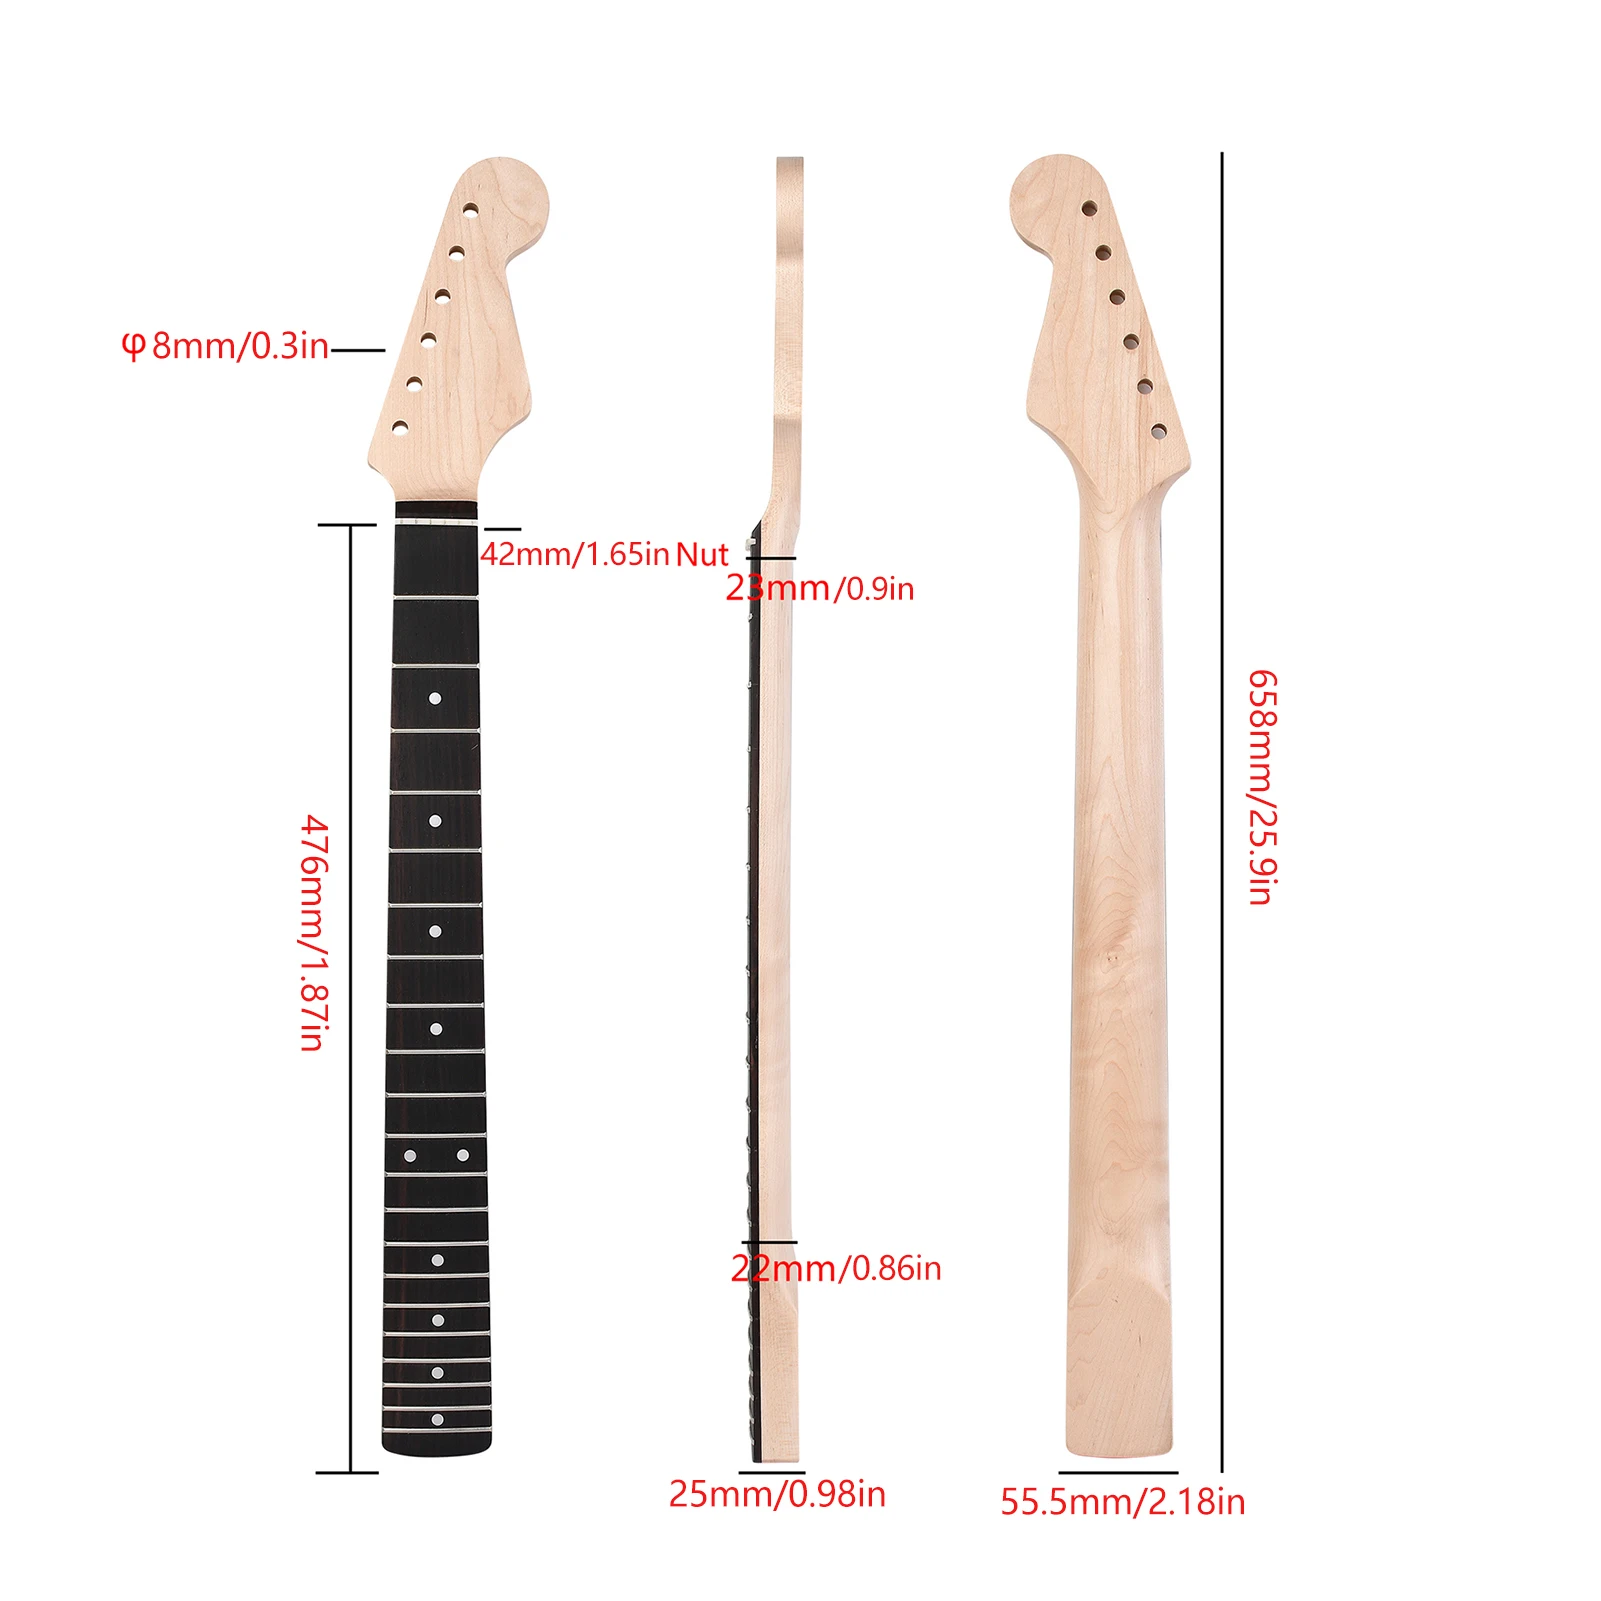 Cables Electric Guitar Neck Rosewood Fingerboard 6 String Guitar Neck 9.5Im Heavy Duty Maple Wood Guitar Practice Neck For St Style